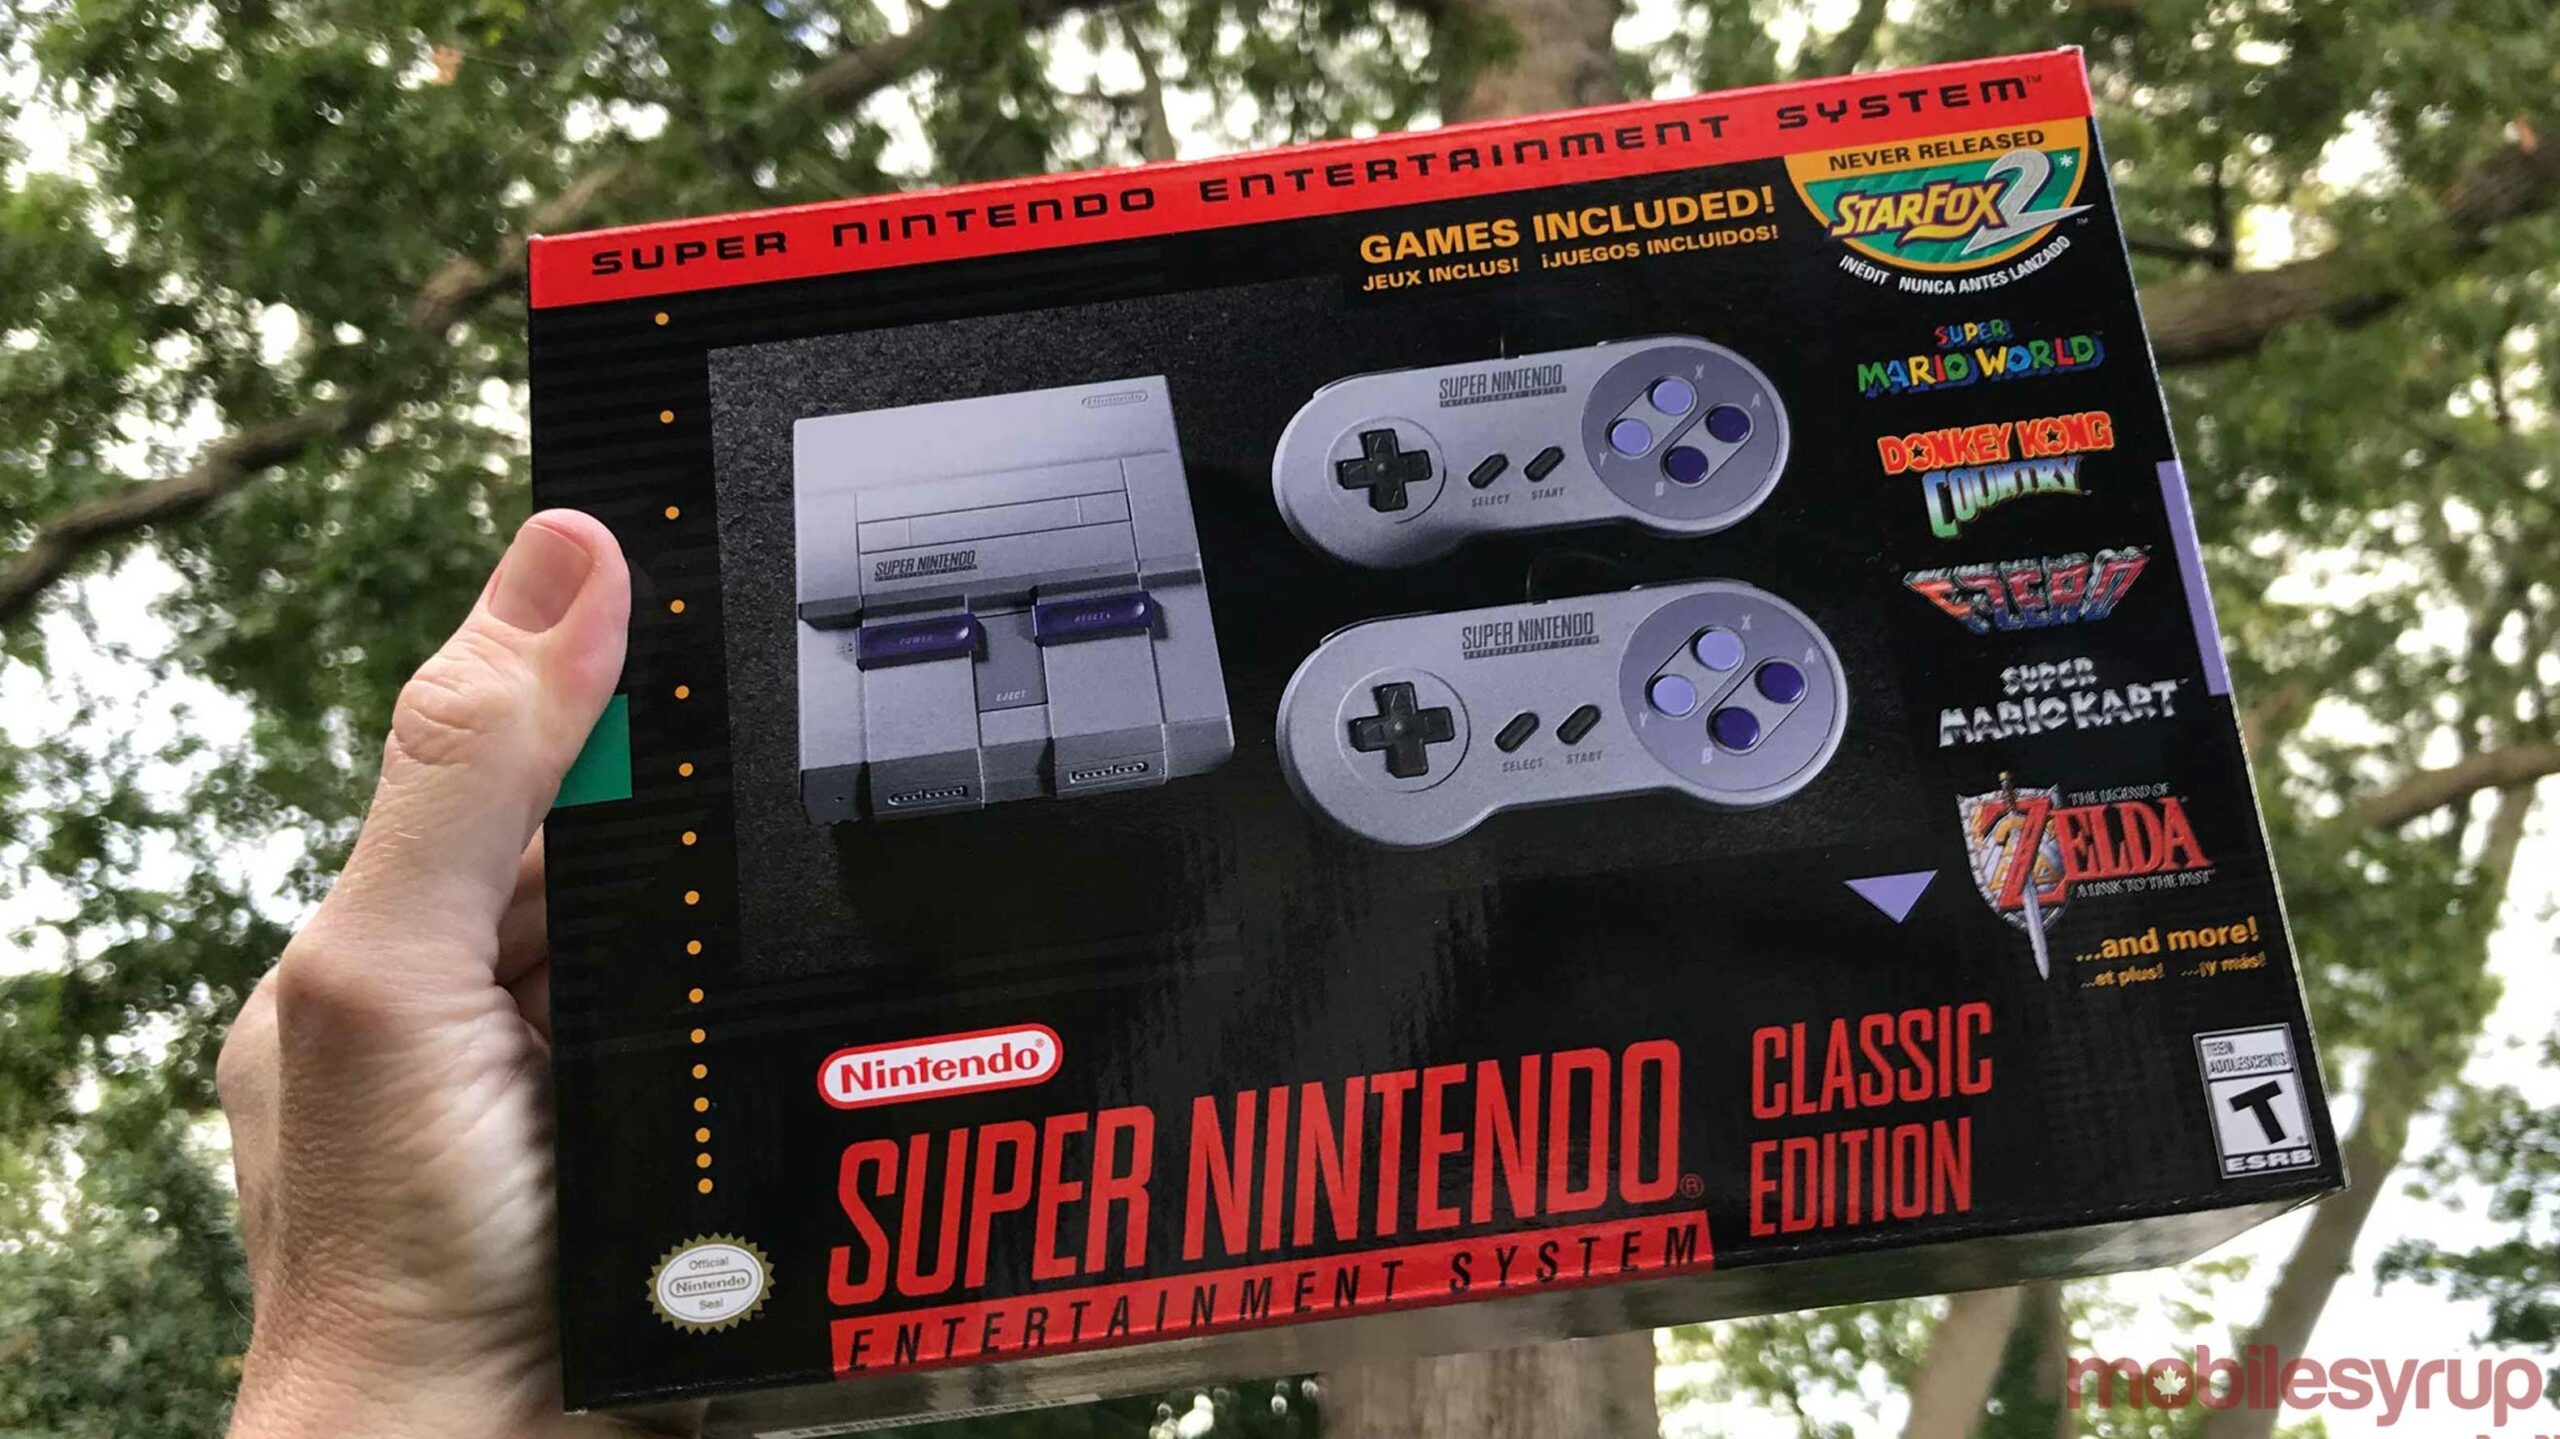 modded snes classic for sale